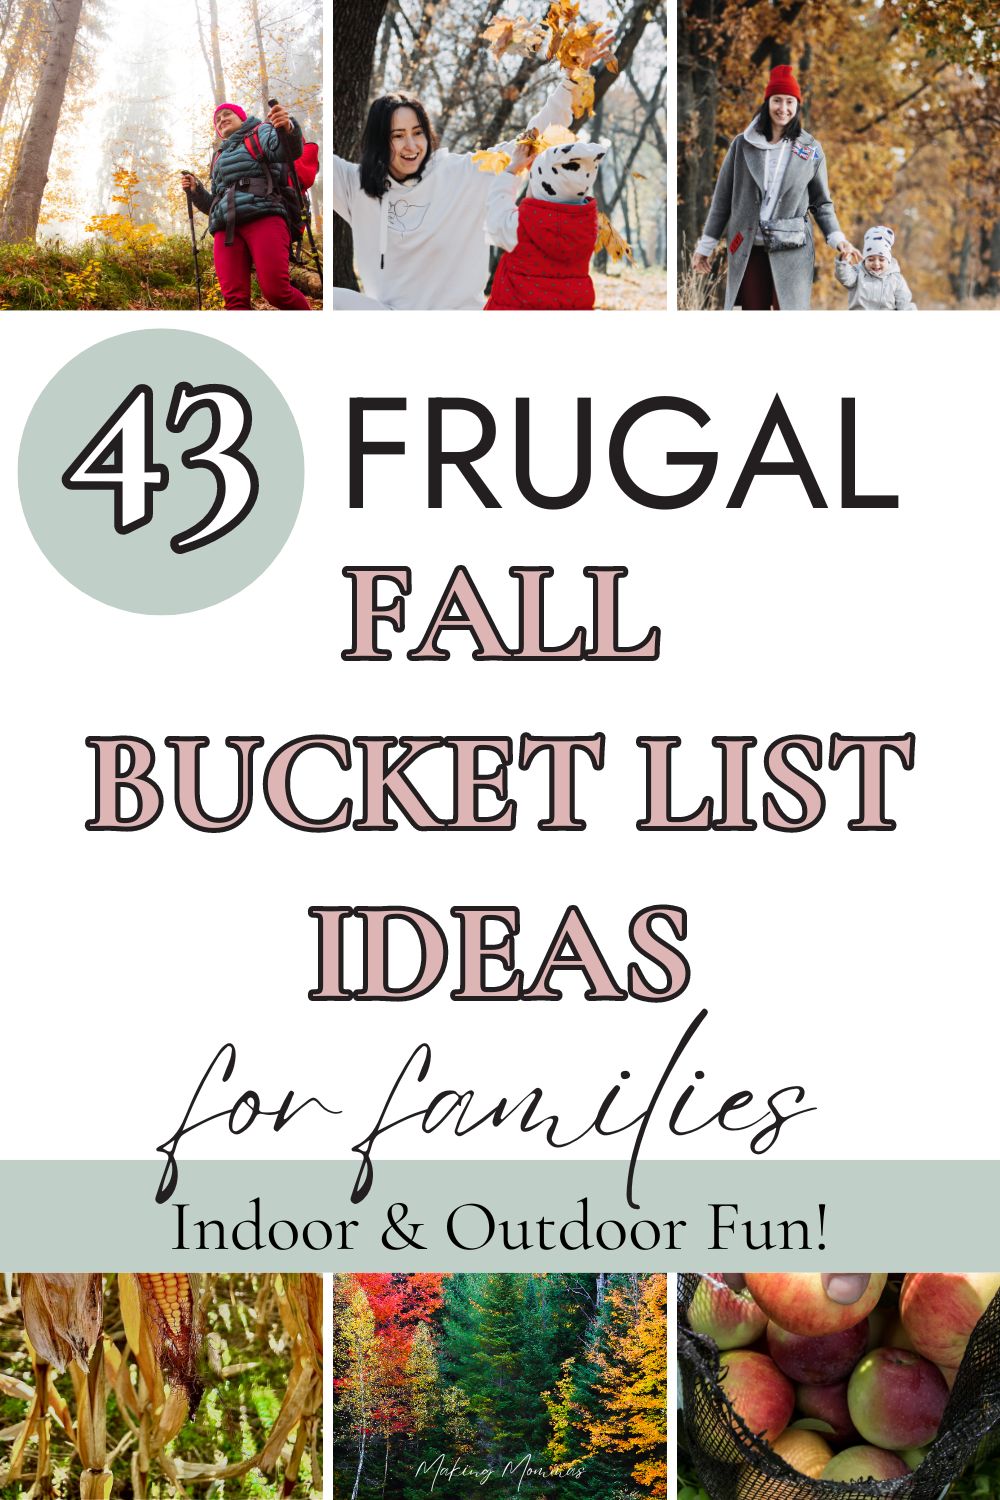 pin image that reads, "43 Frugal fall bucket list ideas for families indoor & outdoor fun" with a collage of fall fun images.